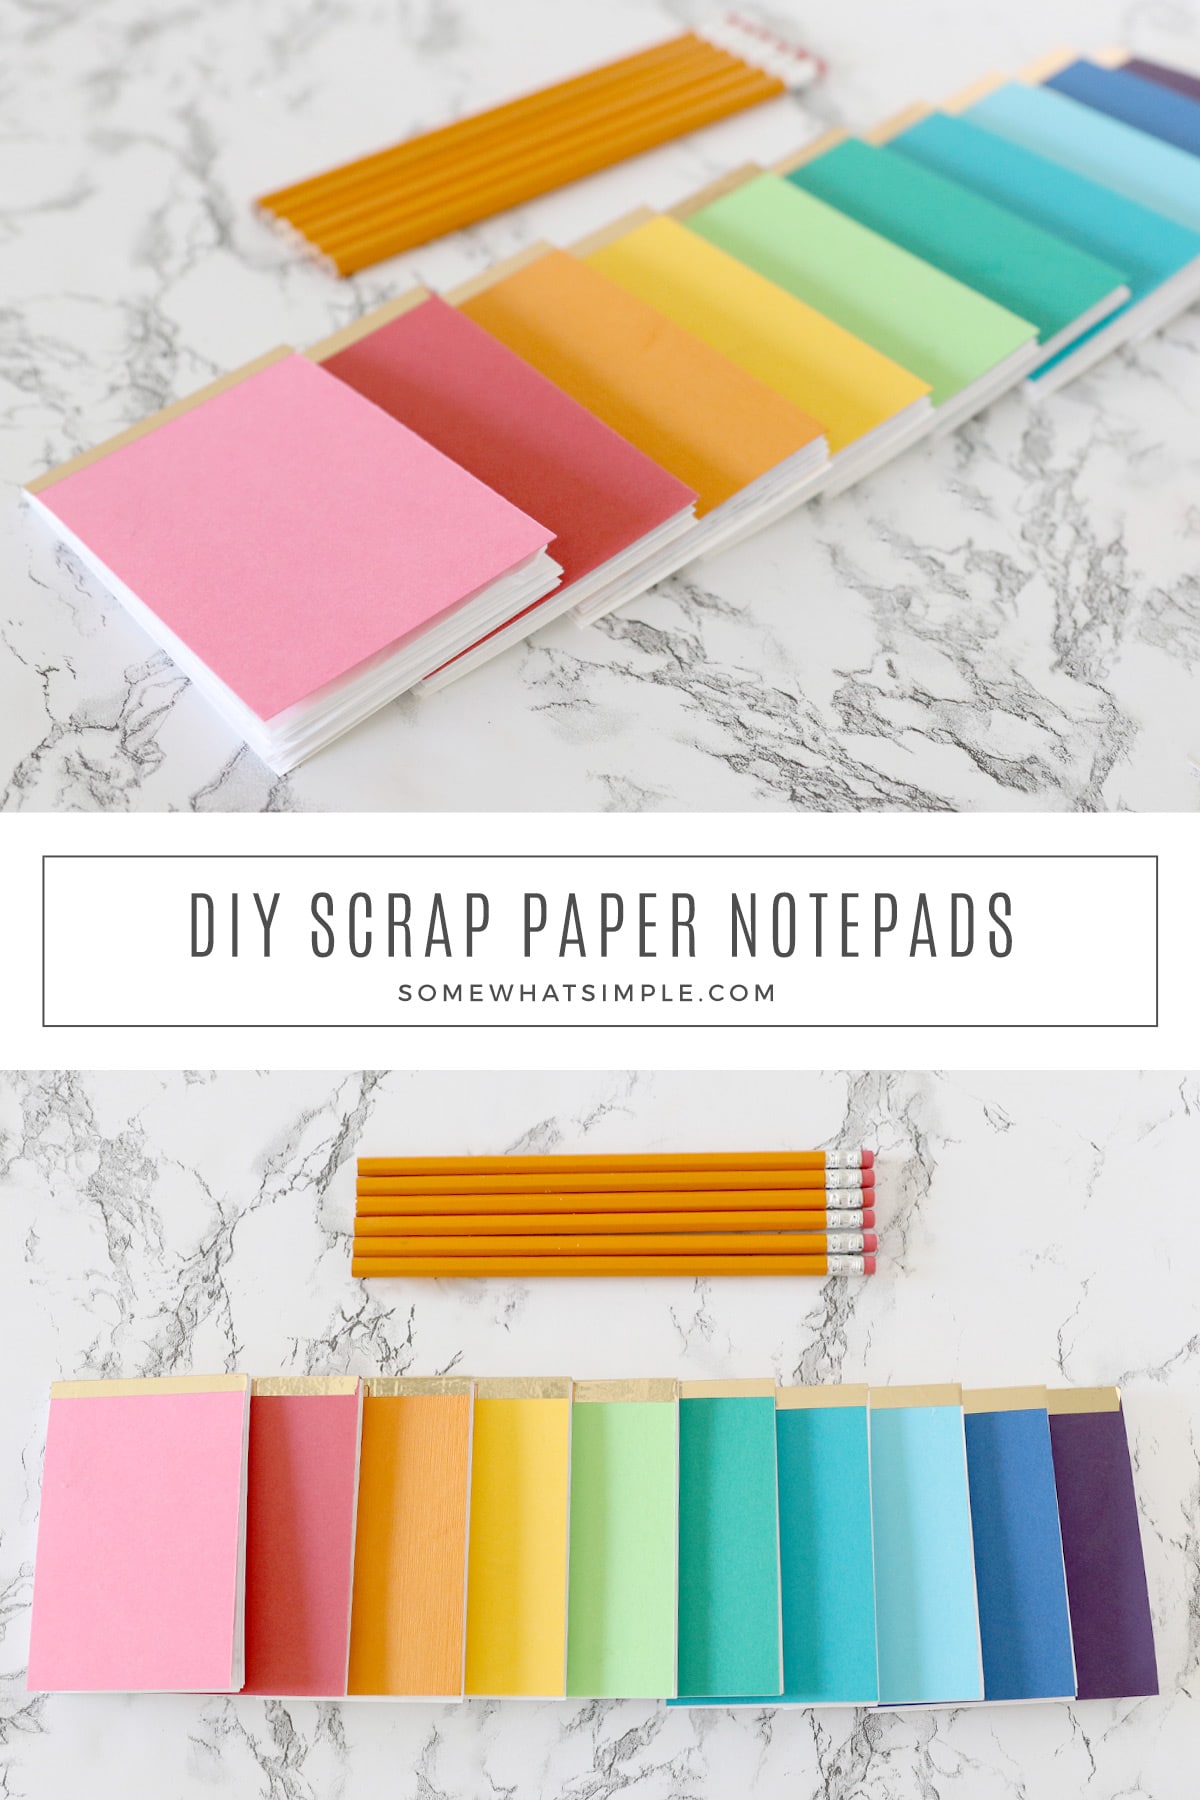 How to make a notepad with fliers and scrap paper in a simple, useful way that looks darling too! via @somewhatsimple